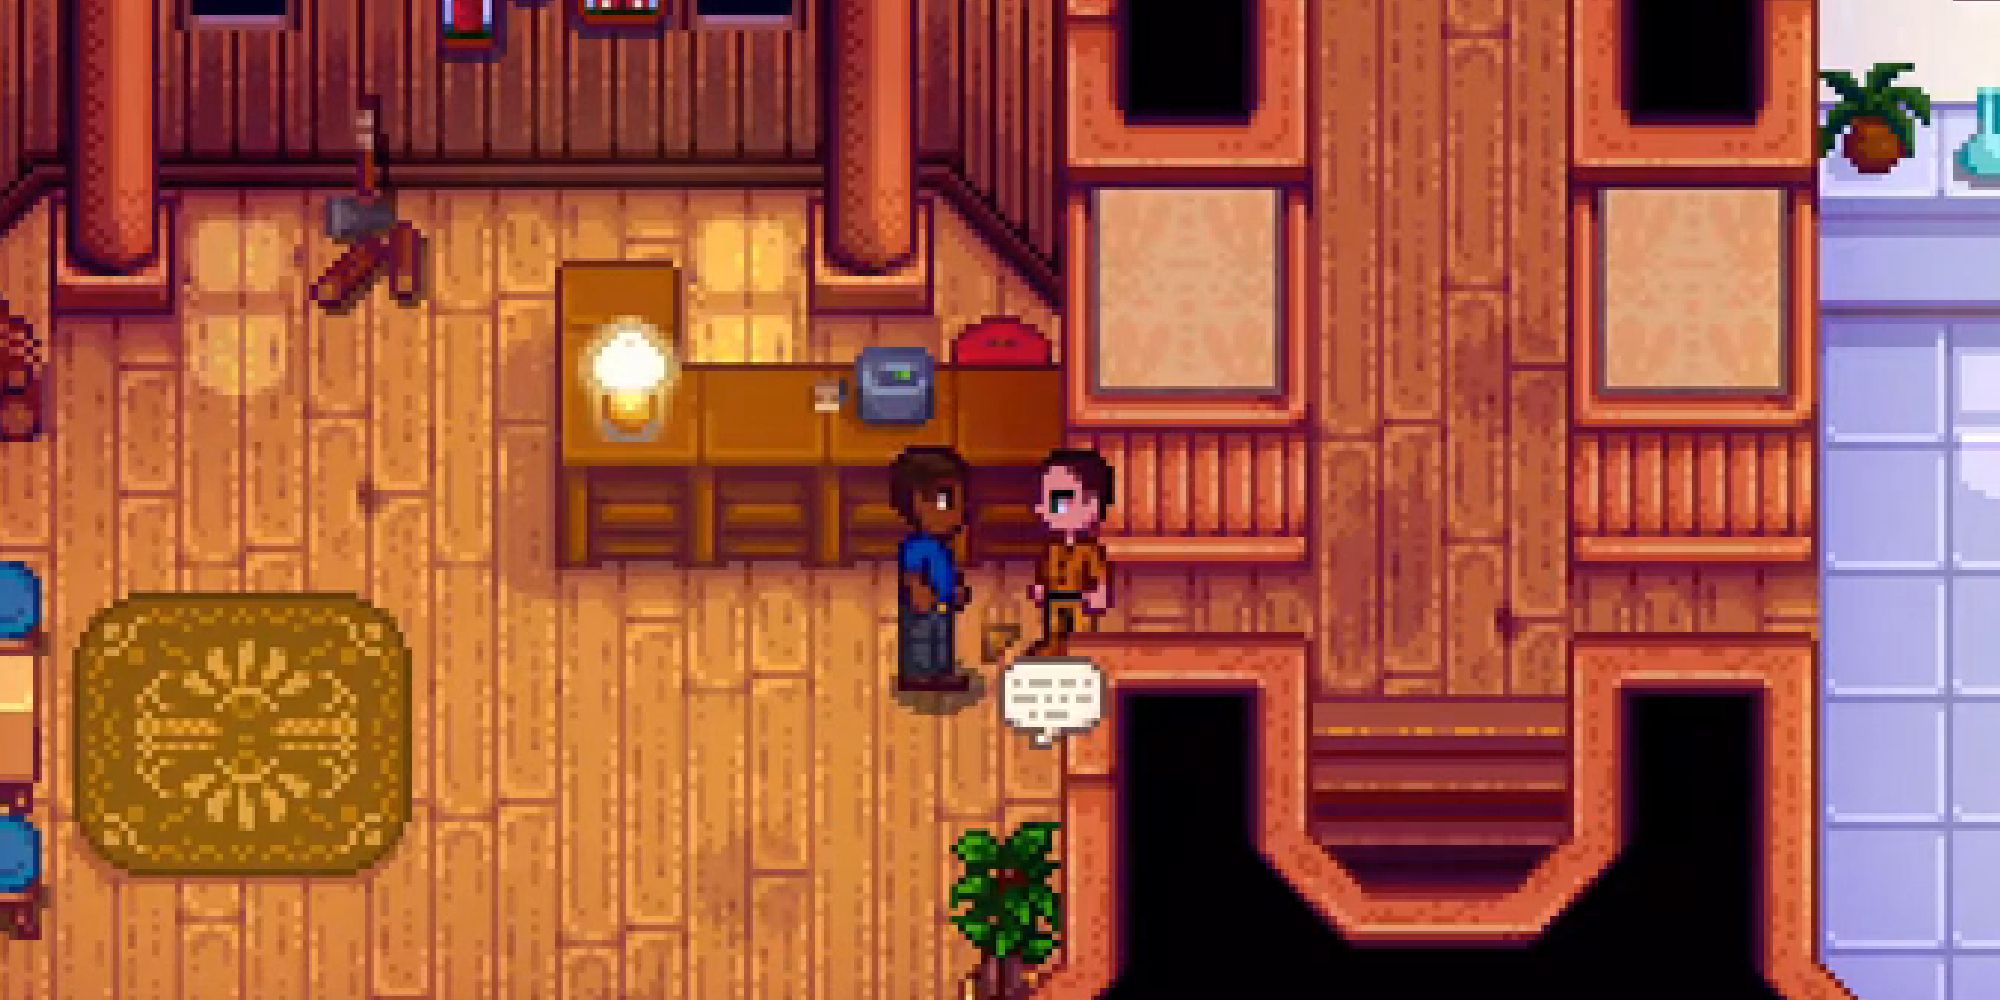 stardew valley player and Demetrius looking at each other